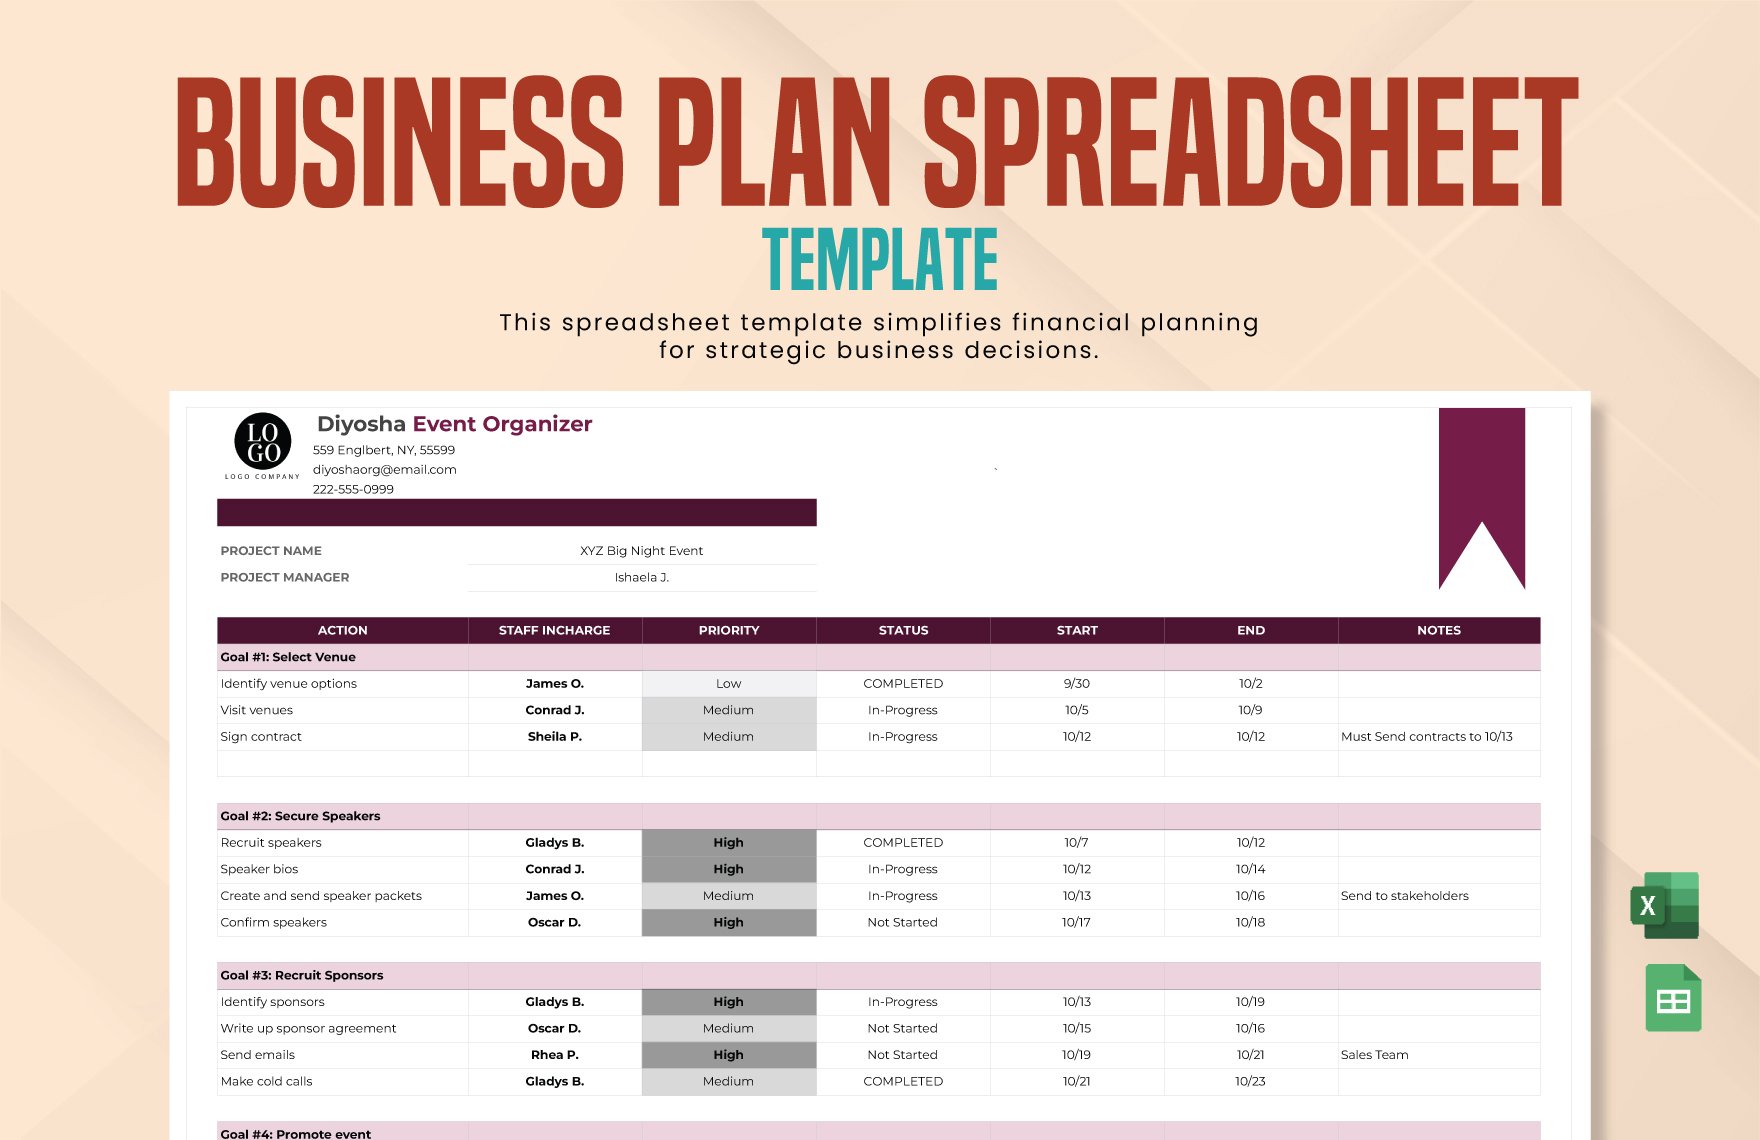 Free Business Plan Spreadsheet in Excel, Google Sheets, Mp4